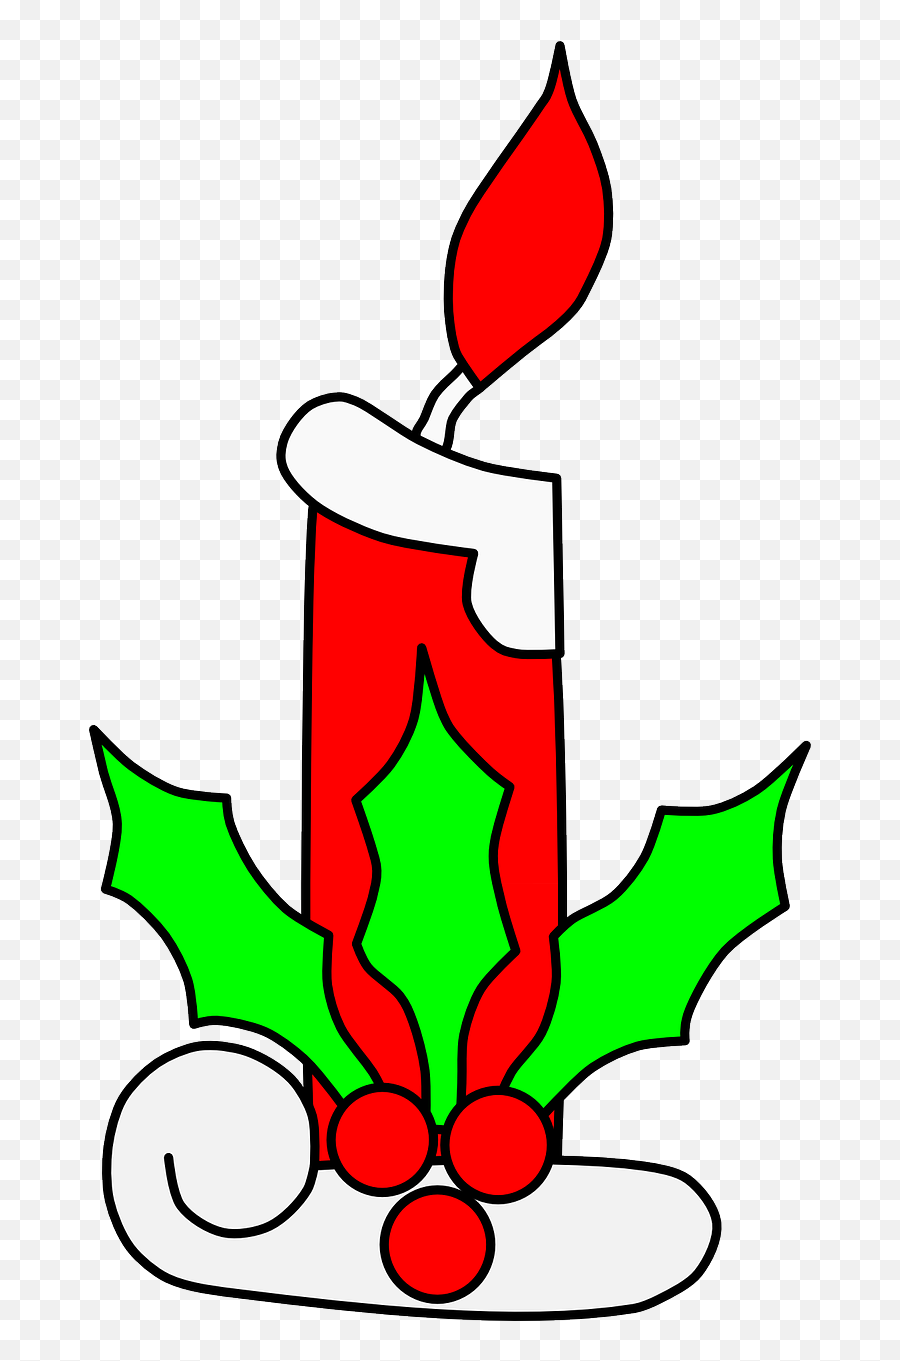 Candle Christmas Light Leaves Png Image - Christmas Candle Clip Art,Christmas Leaves Png